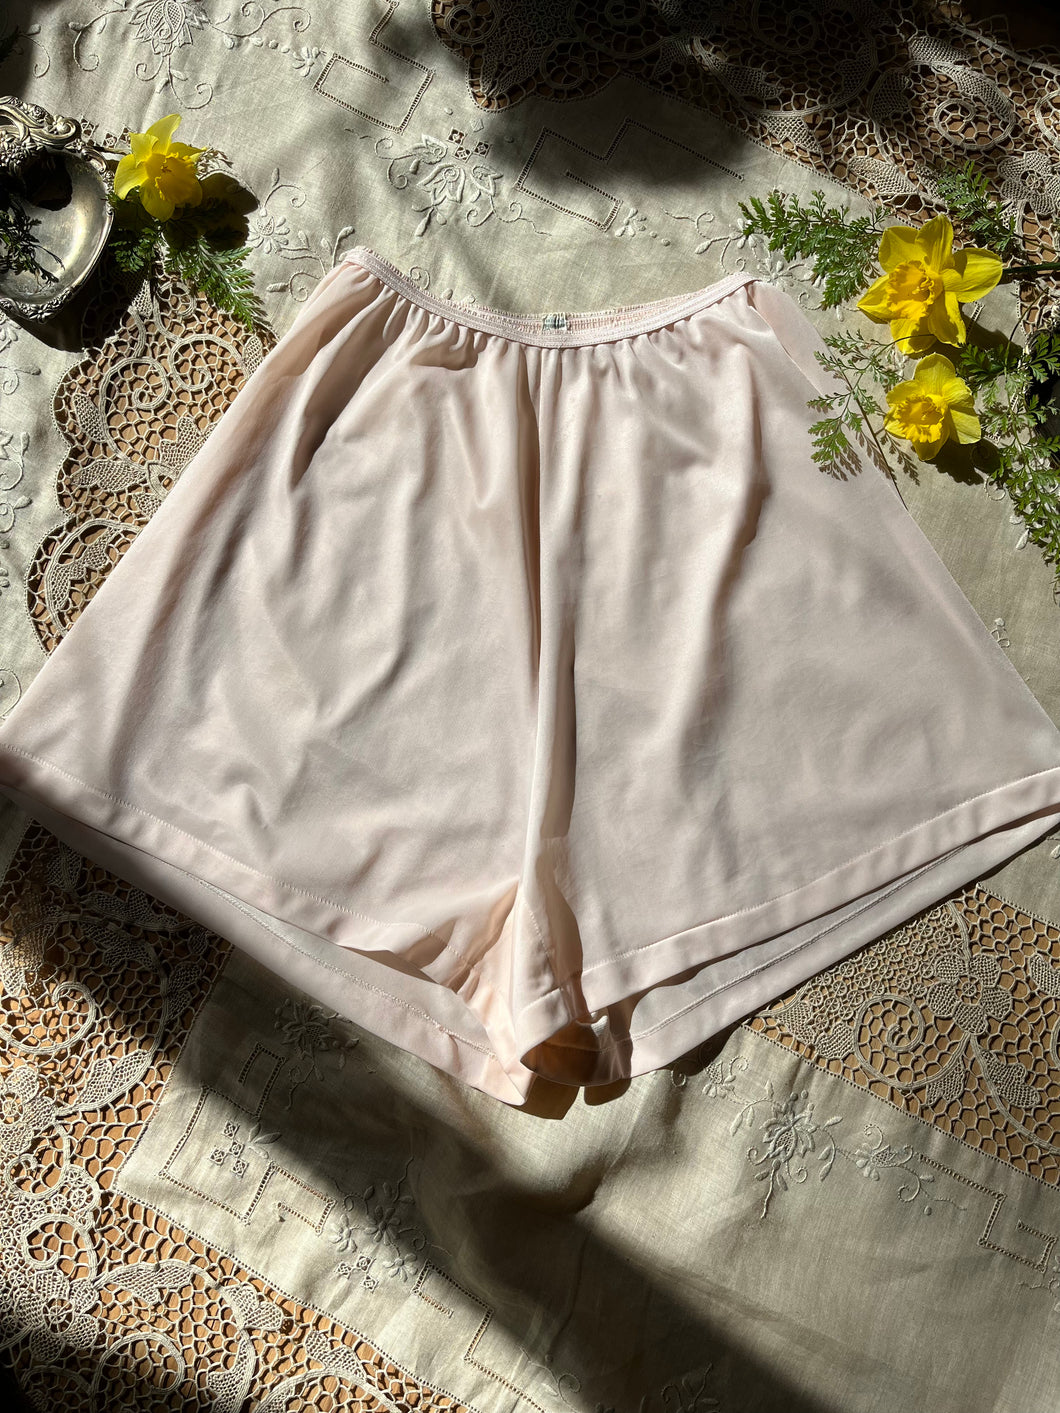 Authentic 1960’s vintage Pink Nylon Tap Panties by Duchess